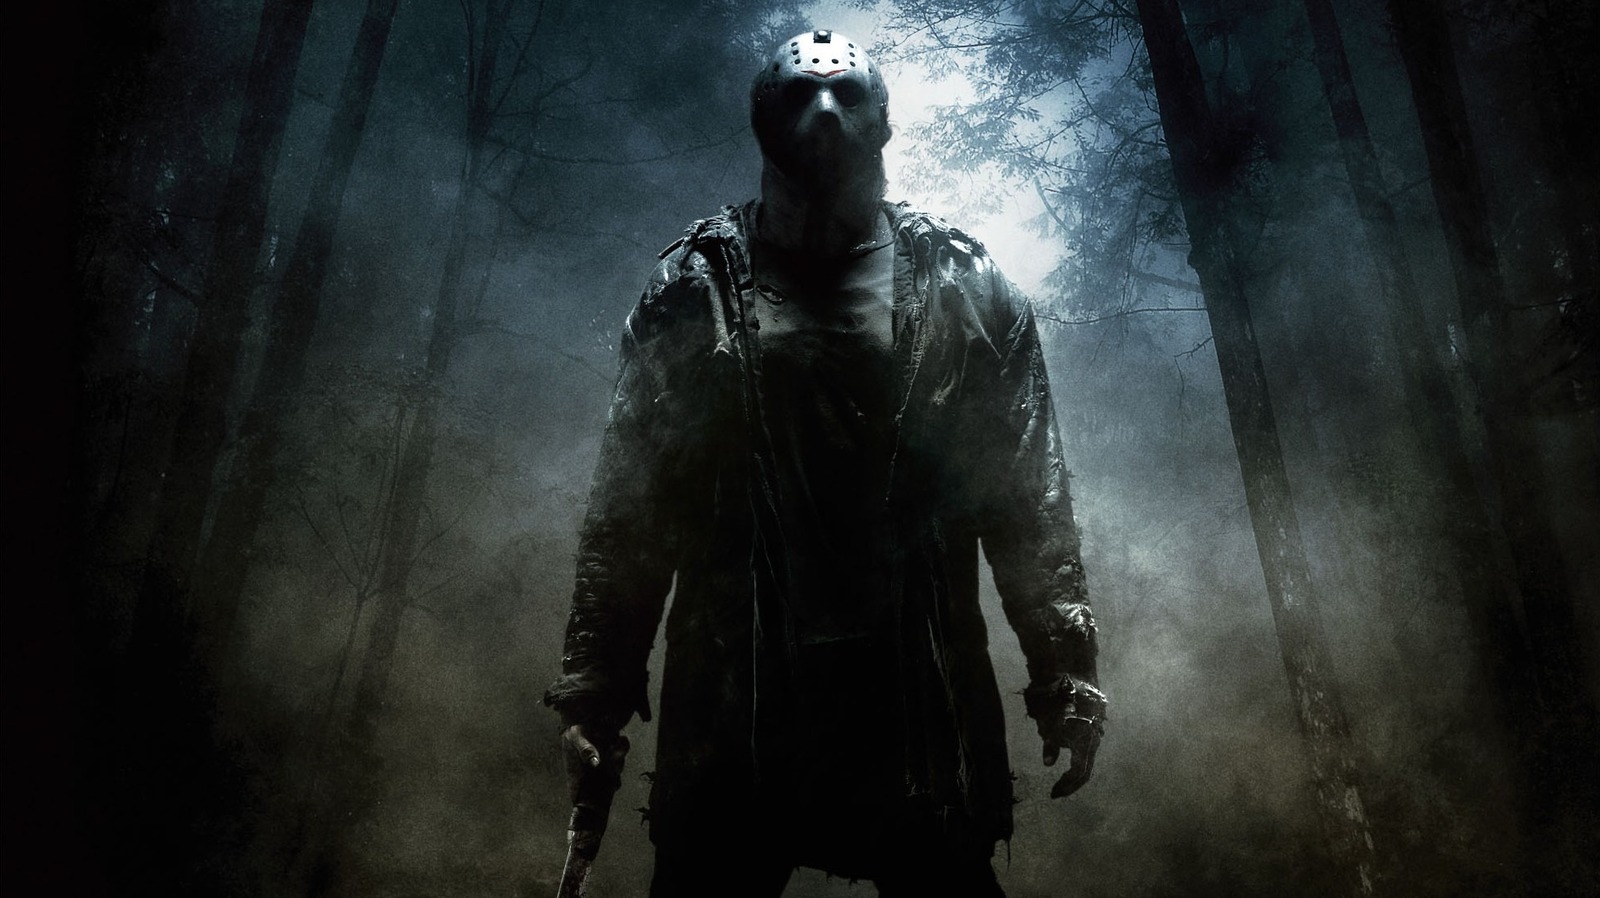 It Sounds Like A New Friday The 13th Movie Is Officially, And Finally, In The Works